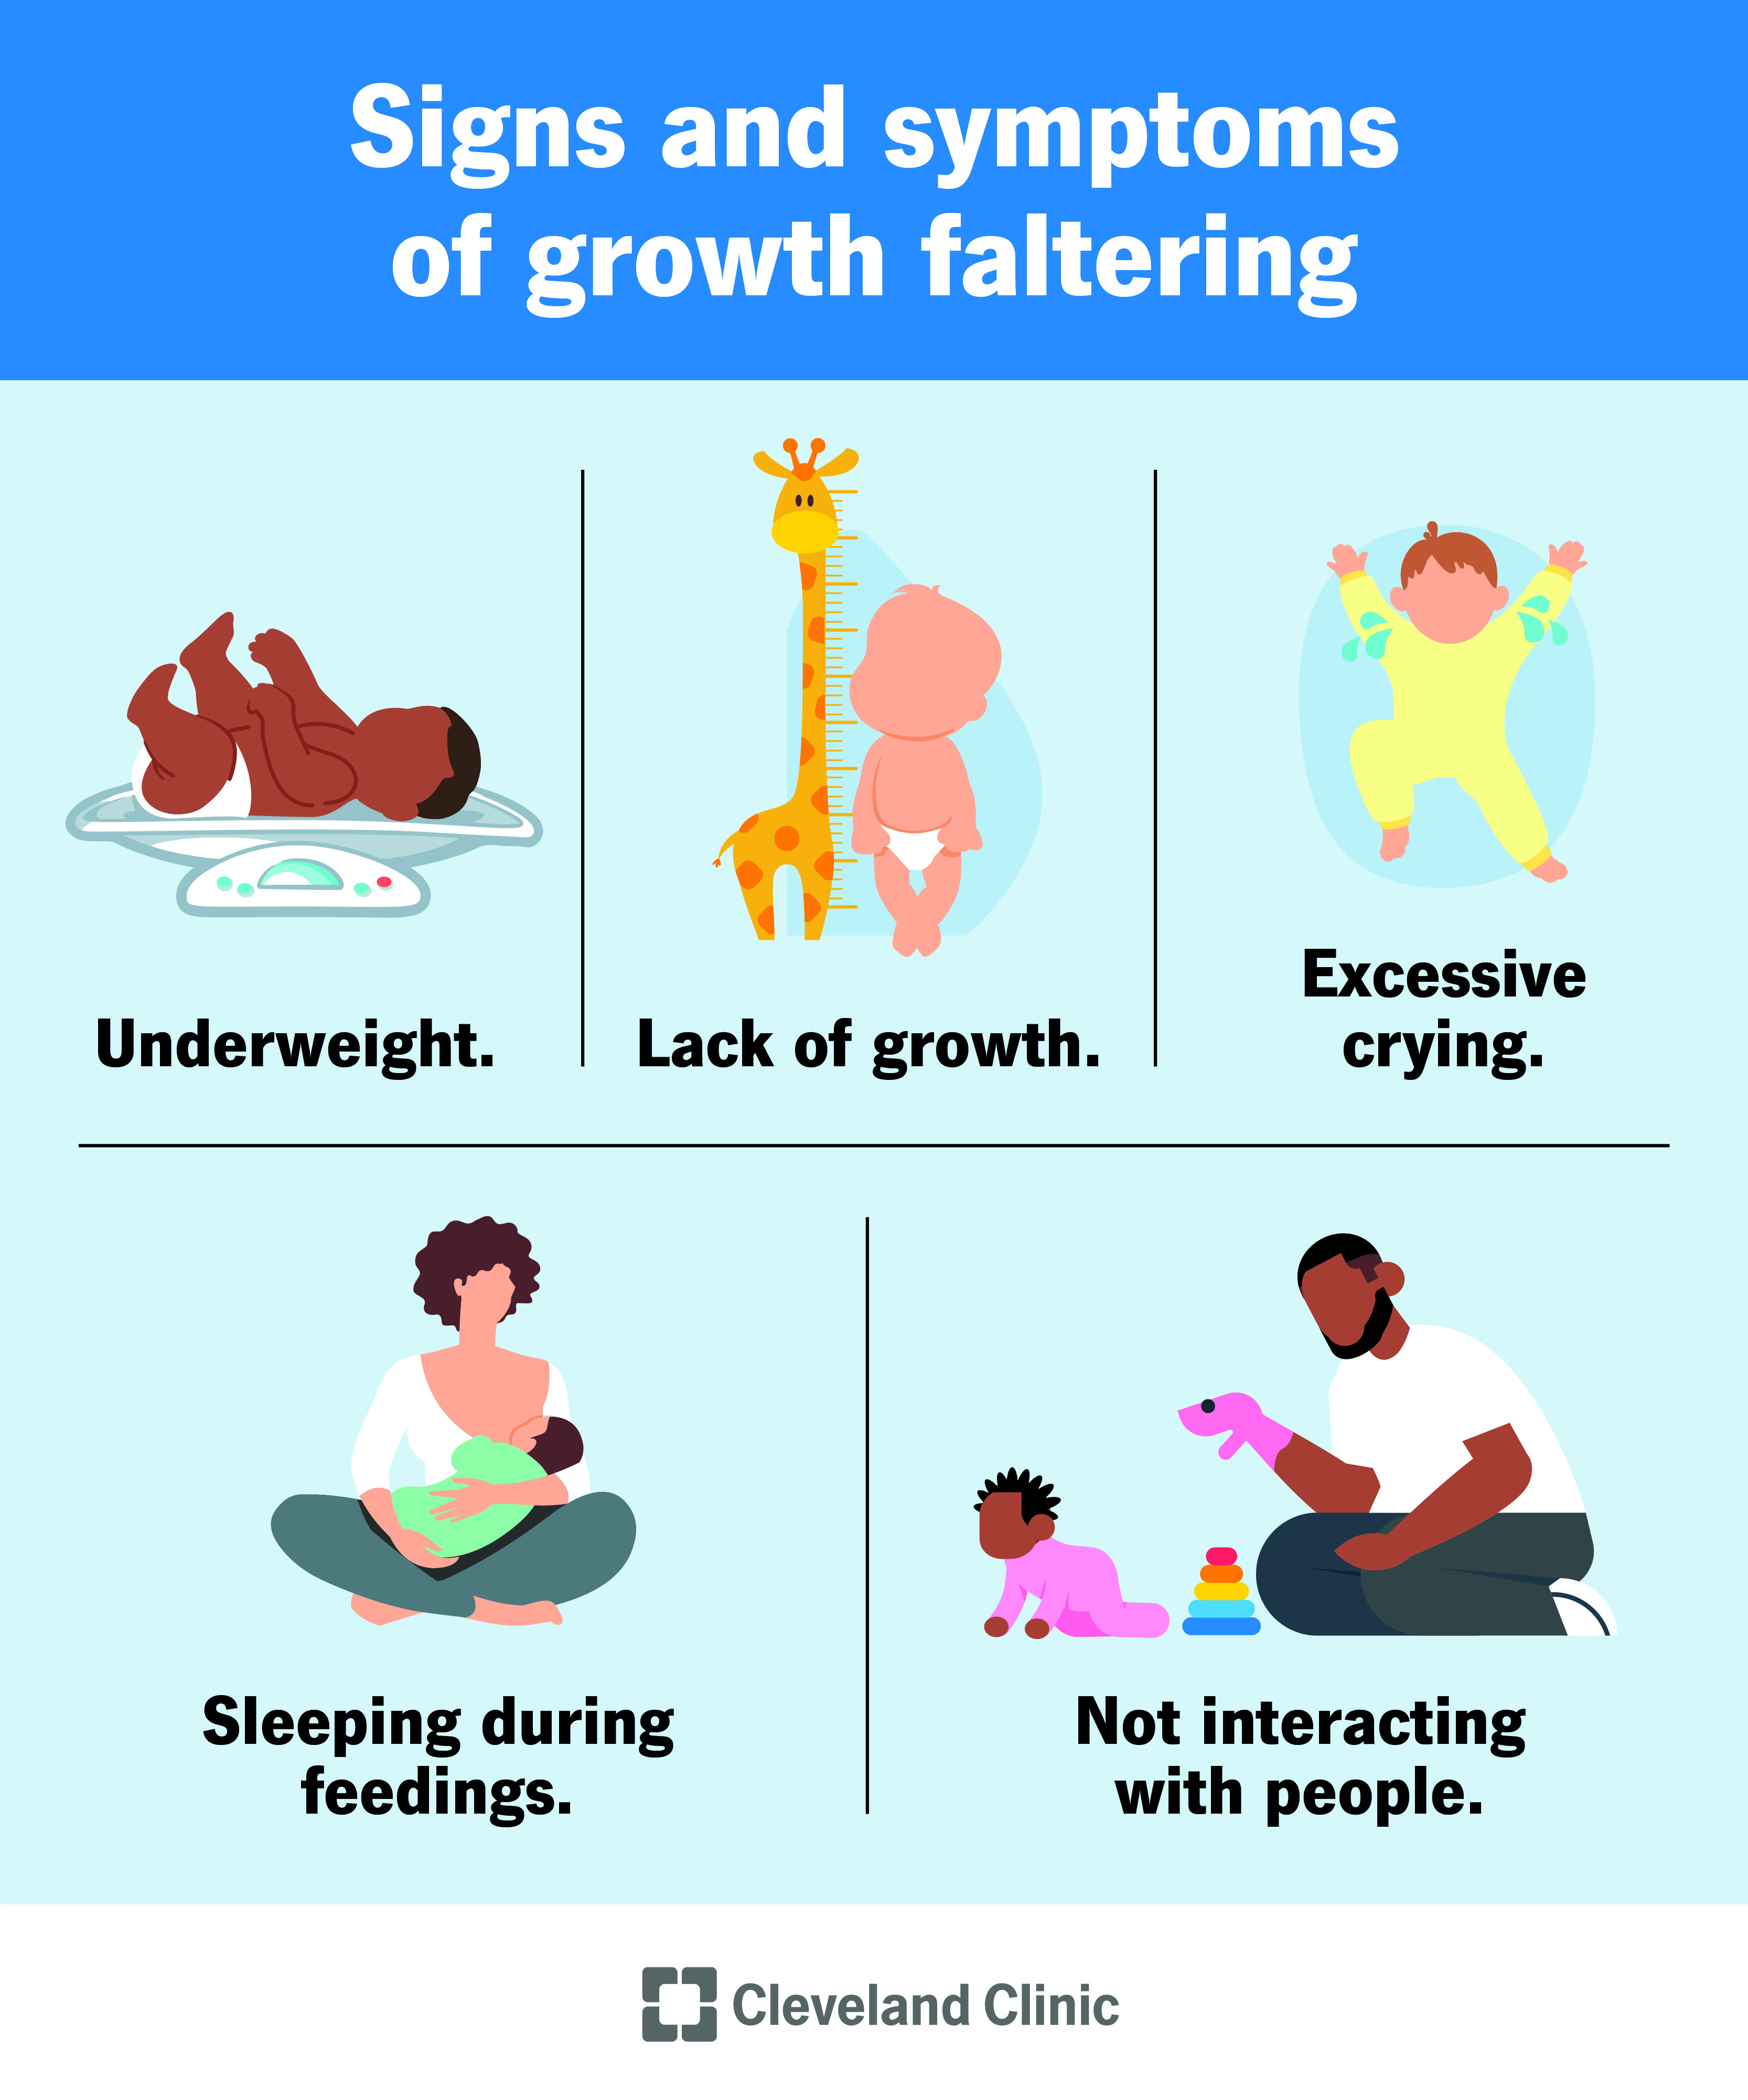 Signs of growth faltering include not gaining weight as expected or not growing in length or height